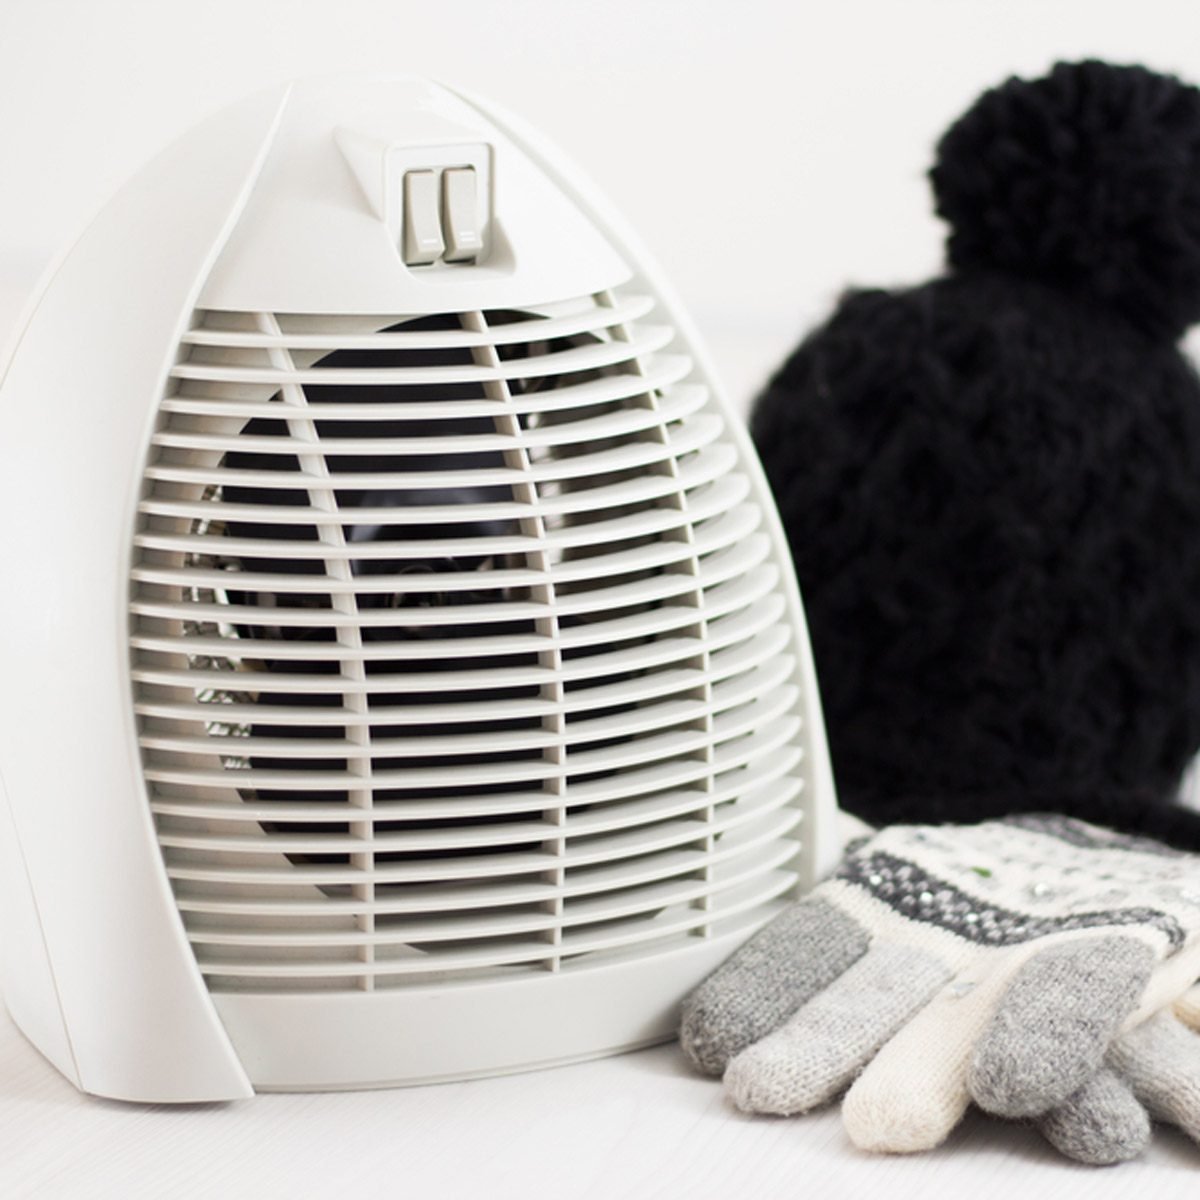 10 Things You Should Know When Using Electric Space Heaters